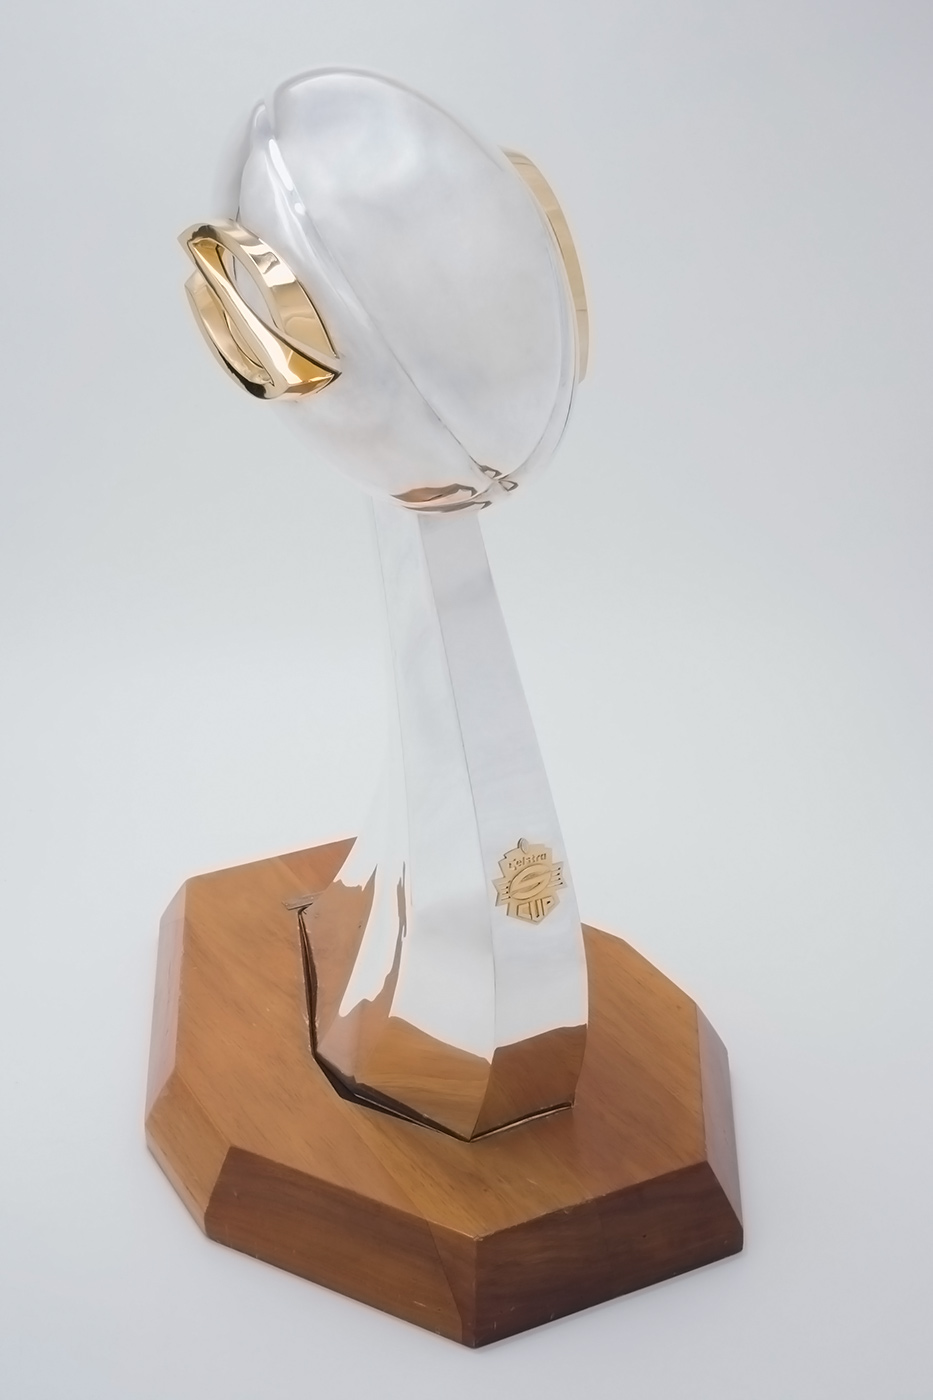 Trophy with a silver football extendeding above a wooden base. - click to view larger image